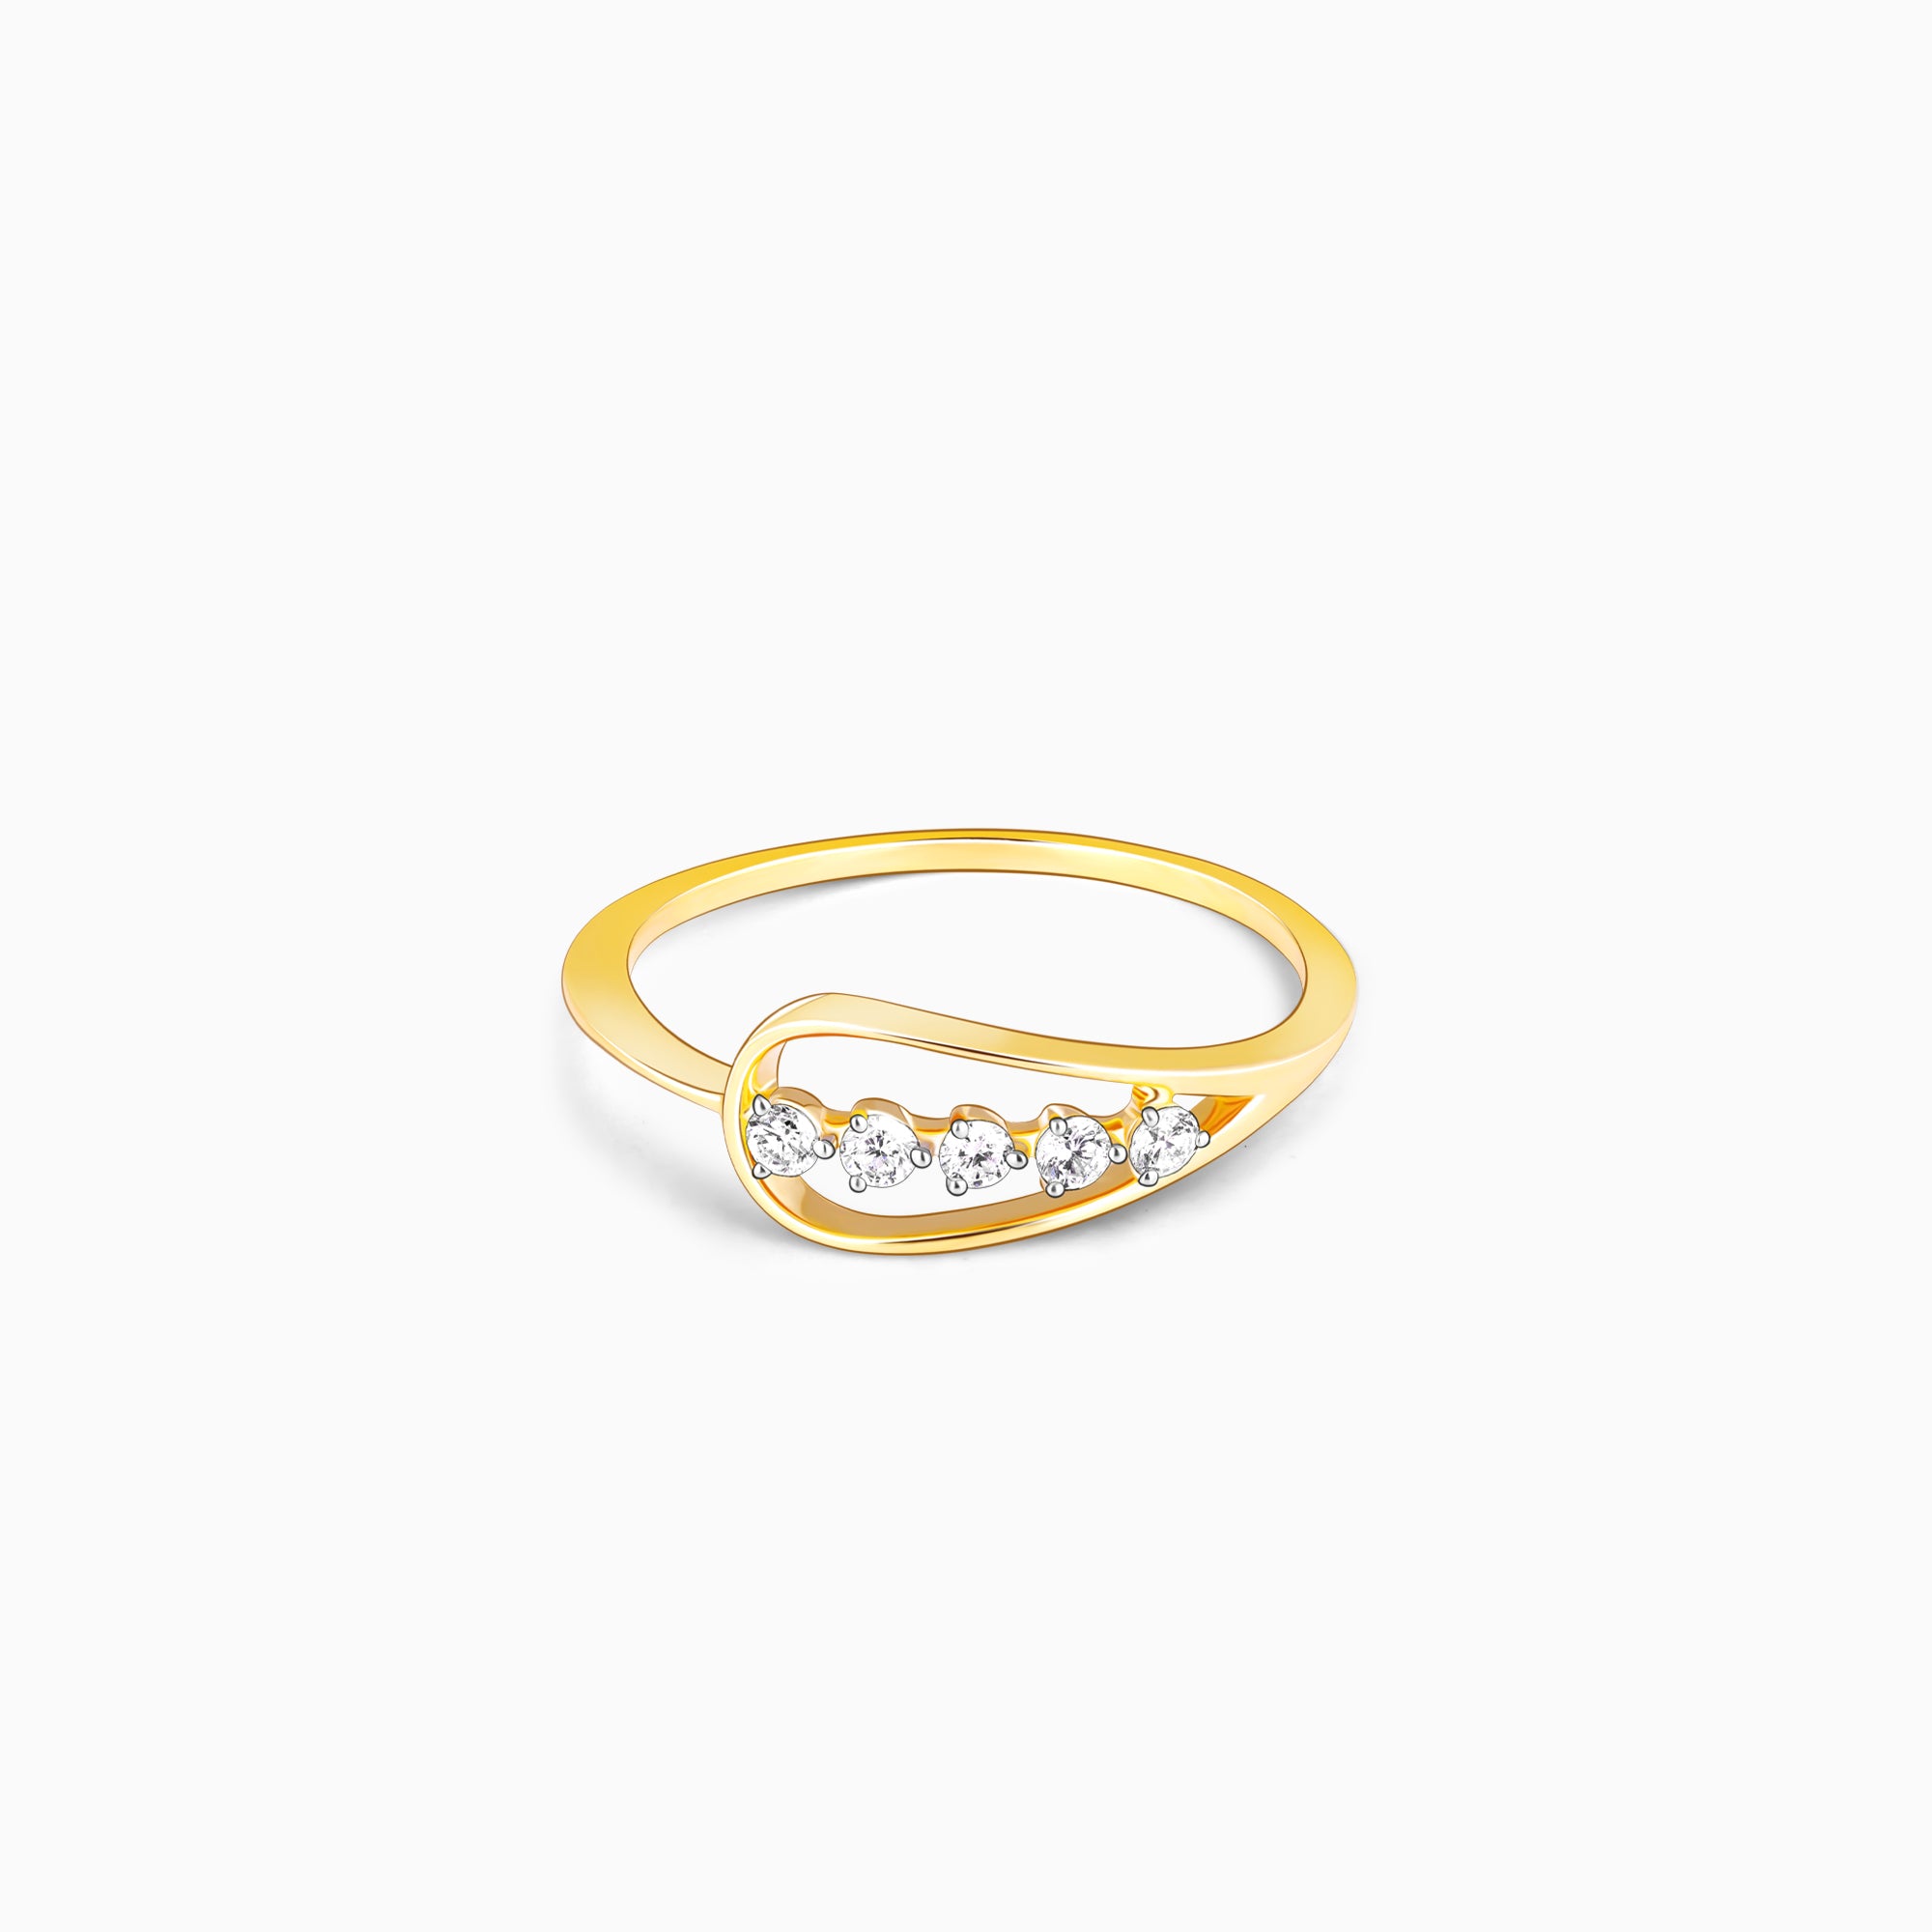 Tanishq gold ring for female with price – Tanishq diamond rings with prices  – Price List – – Clickindia | pink gold rings for women pictures clip art